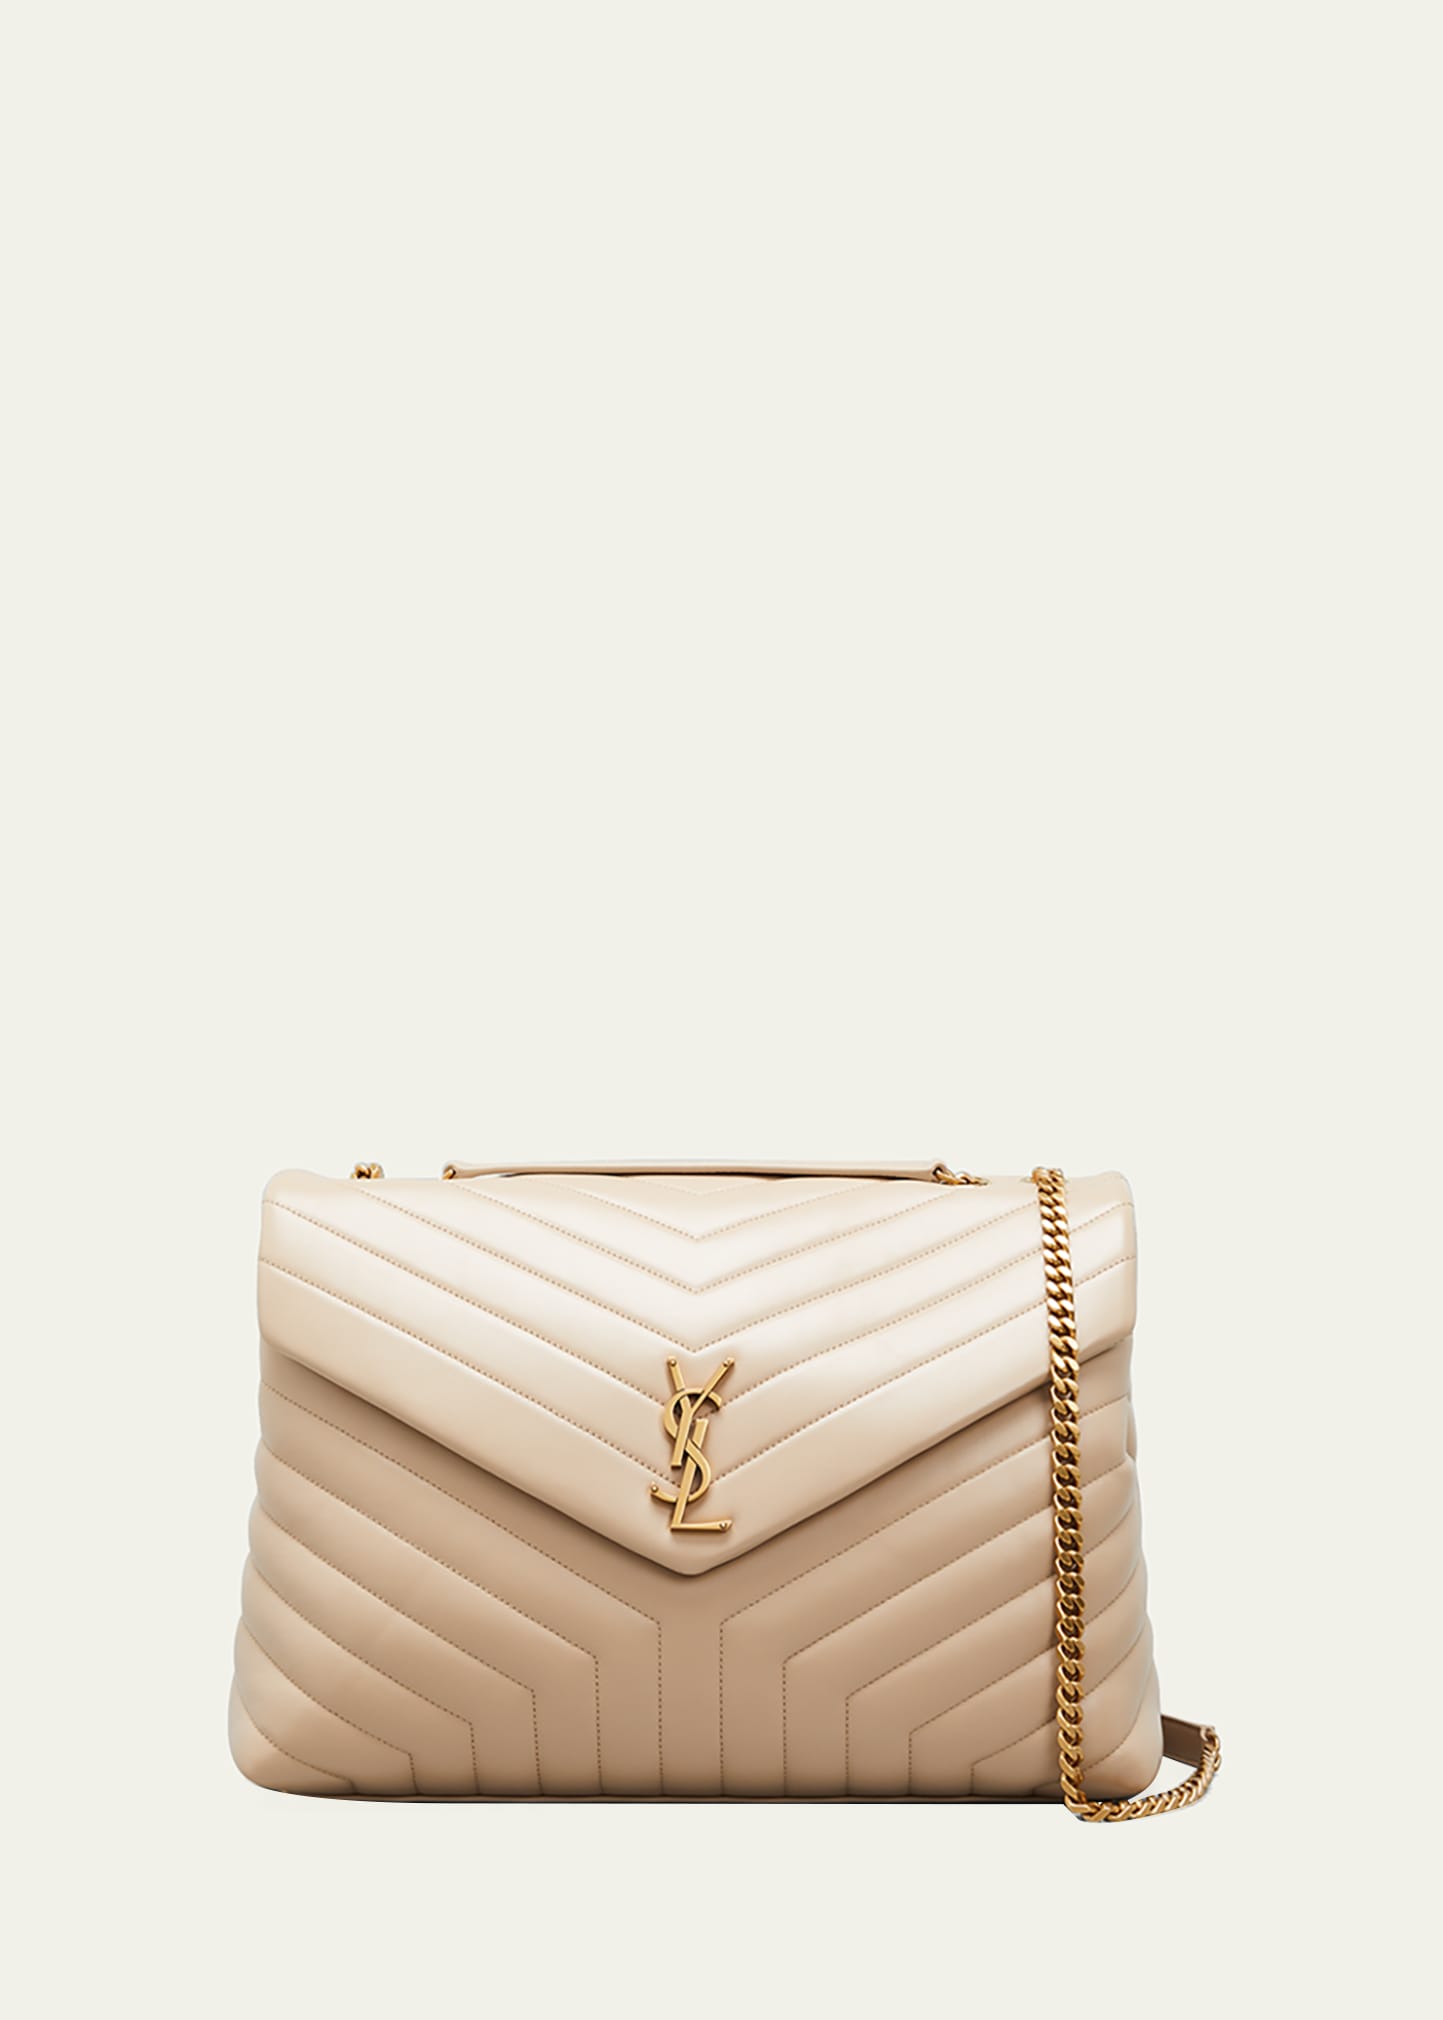 Saint Laurent Loulou Quilted Leather Ysl Bag In Dark Beige